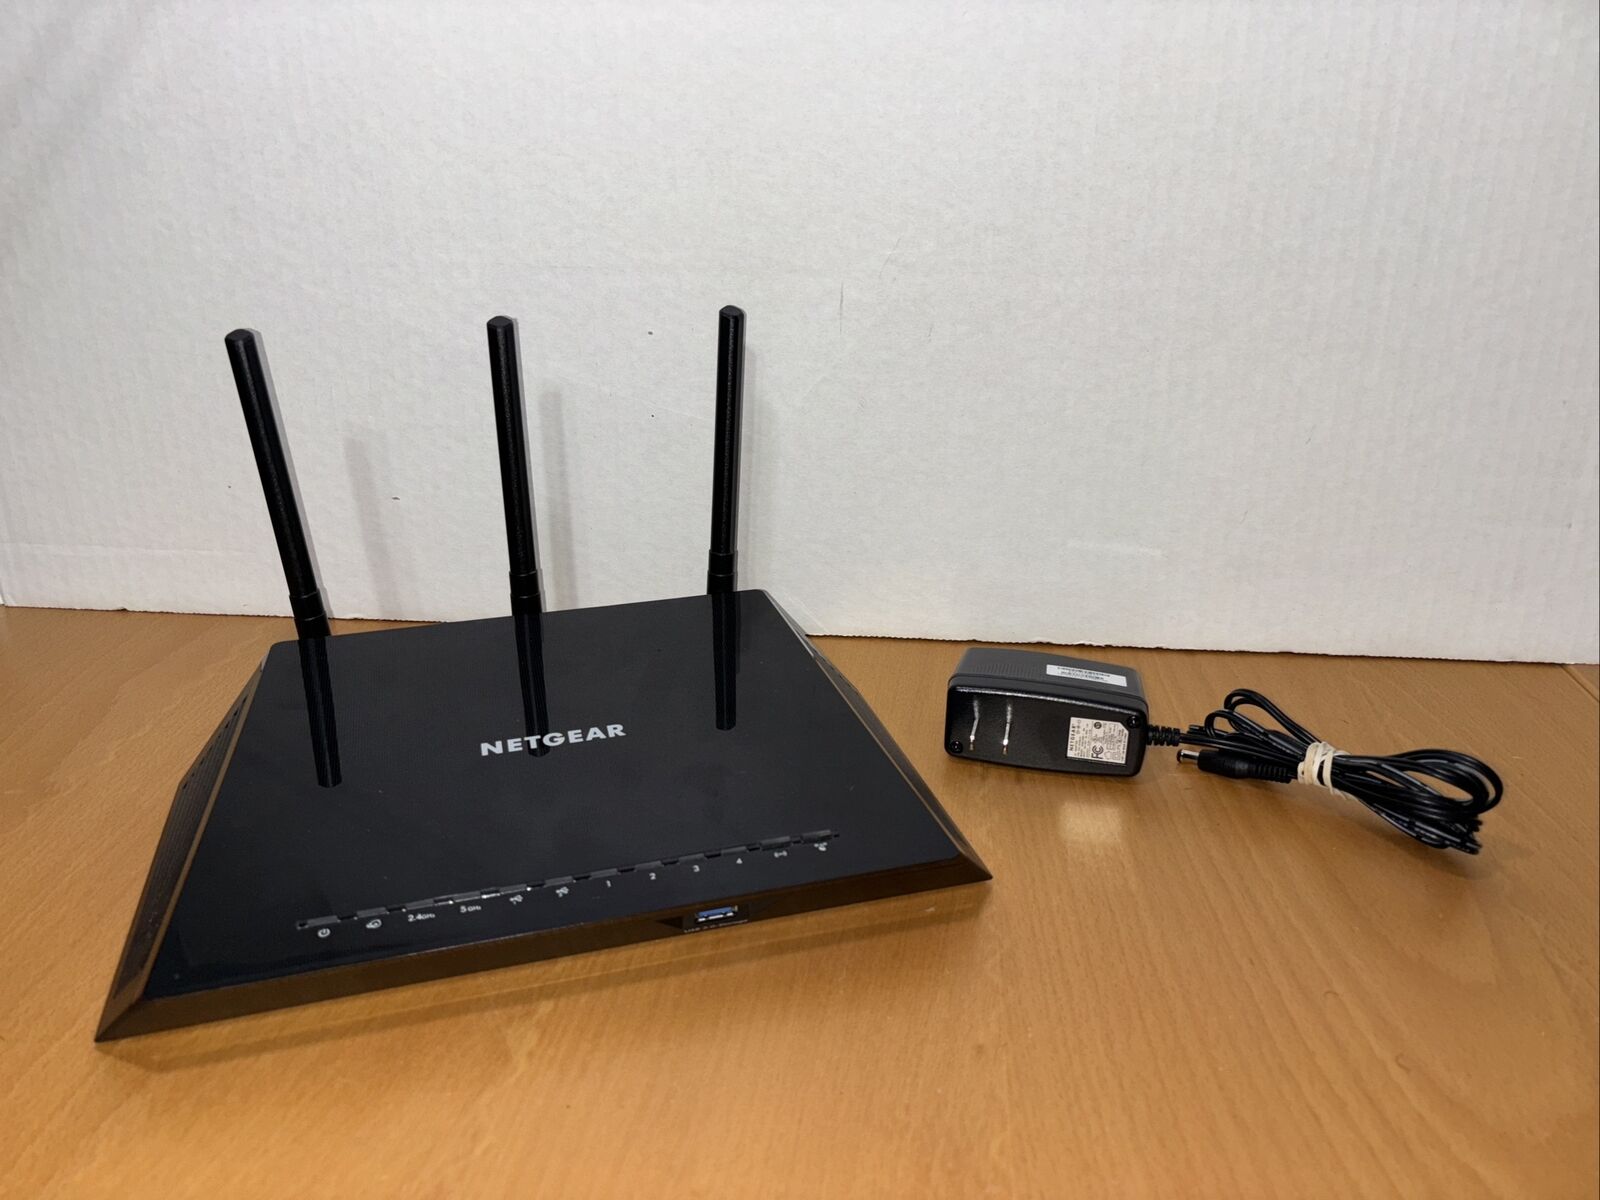 Netgear AC1750 R6400 1300 Mbps Smart Wi-Fi Router- Reset And Tested